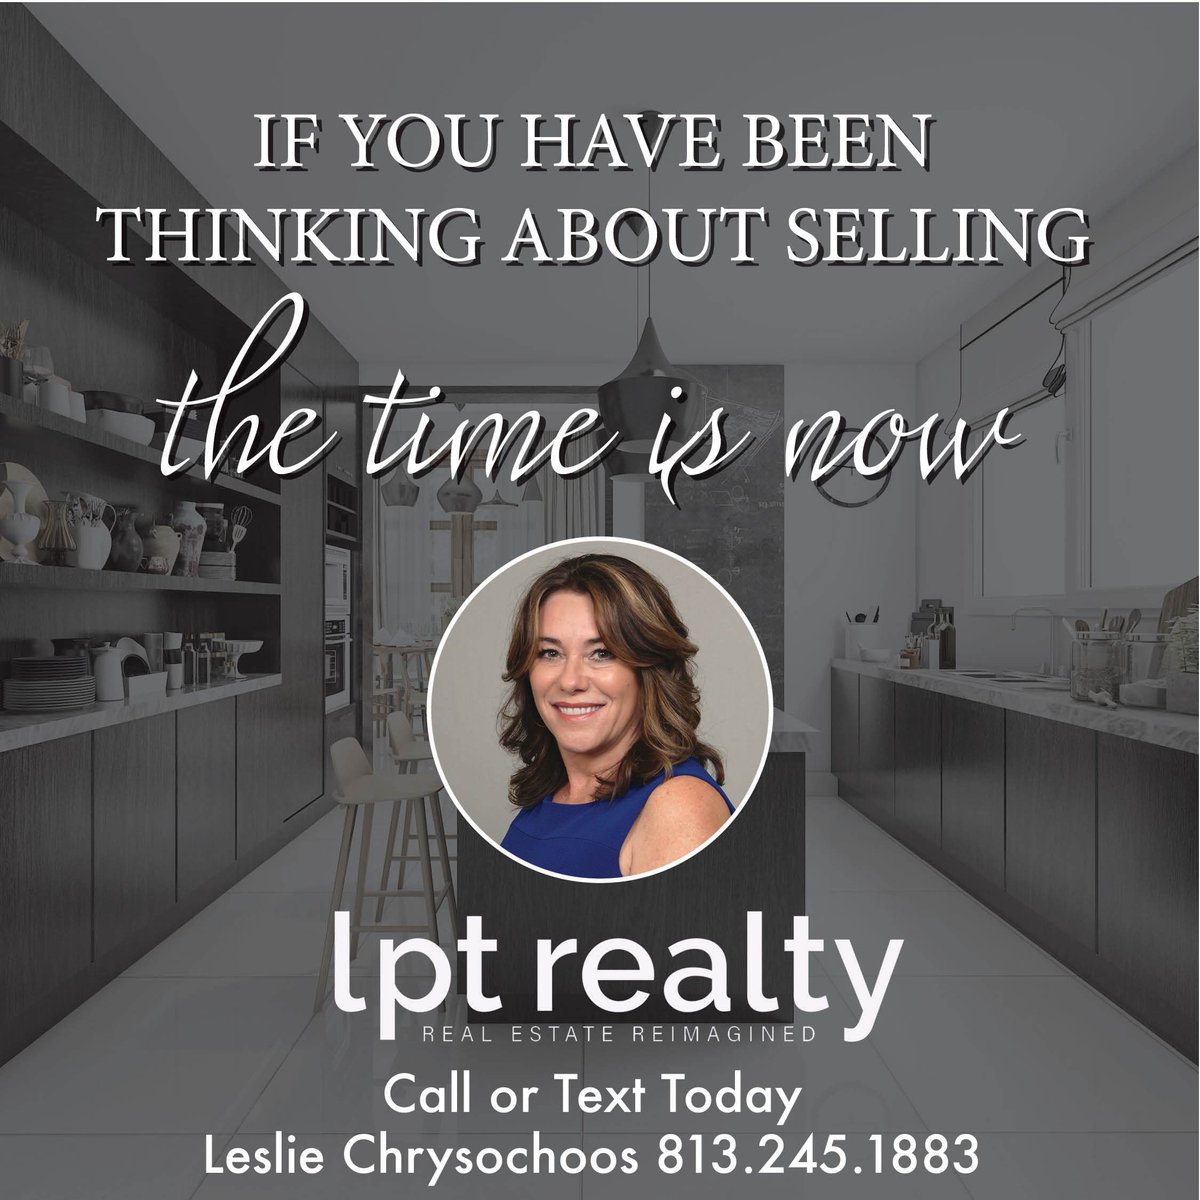 Thinking about selling? Now's the time!
Call or text me at 813-245-1883 and let's chat.

#realestate #luxuryhomes #tampabayhomes #lptrealty #LptMagic #RealEstateReimagined #lptsocials #tampahomefinders #tamparealtor #813realtor #tampabay #realestateagent #relocatetoFlorida...